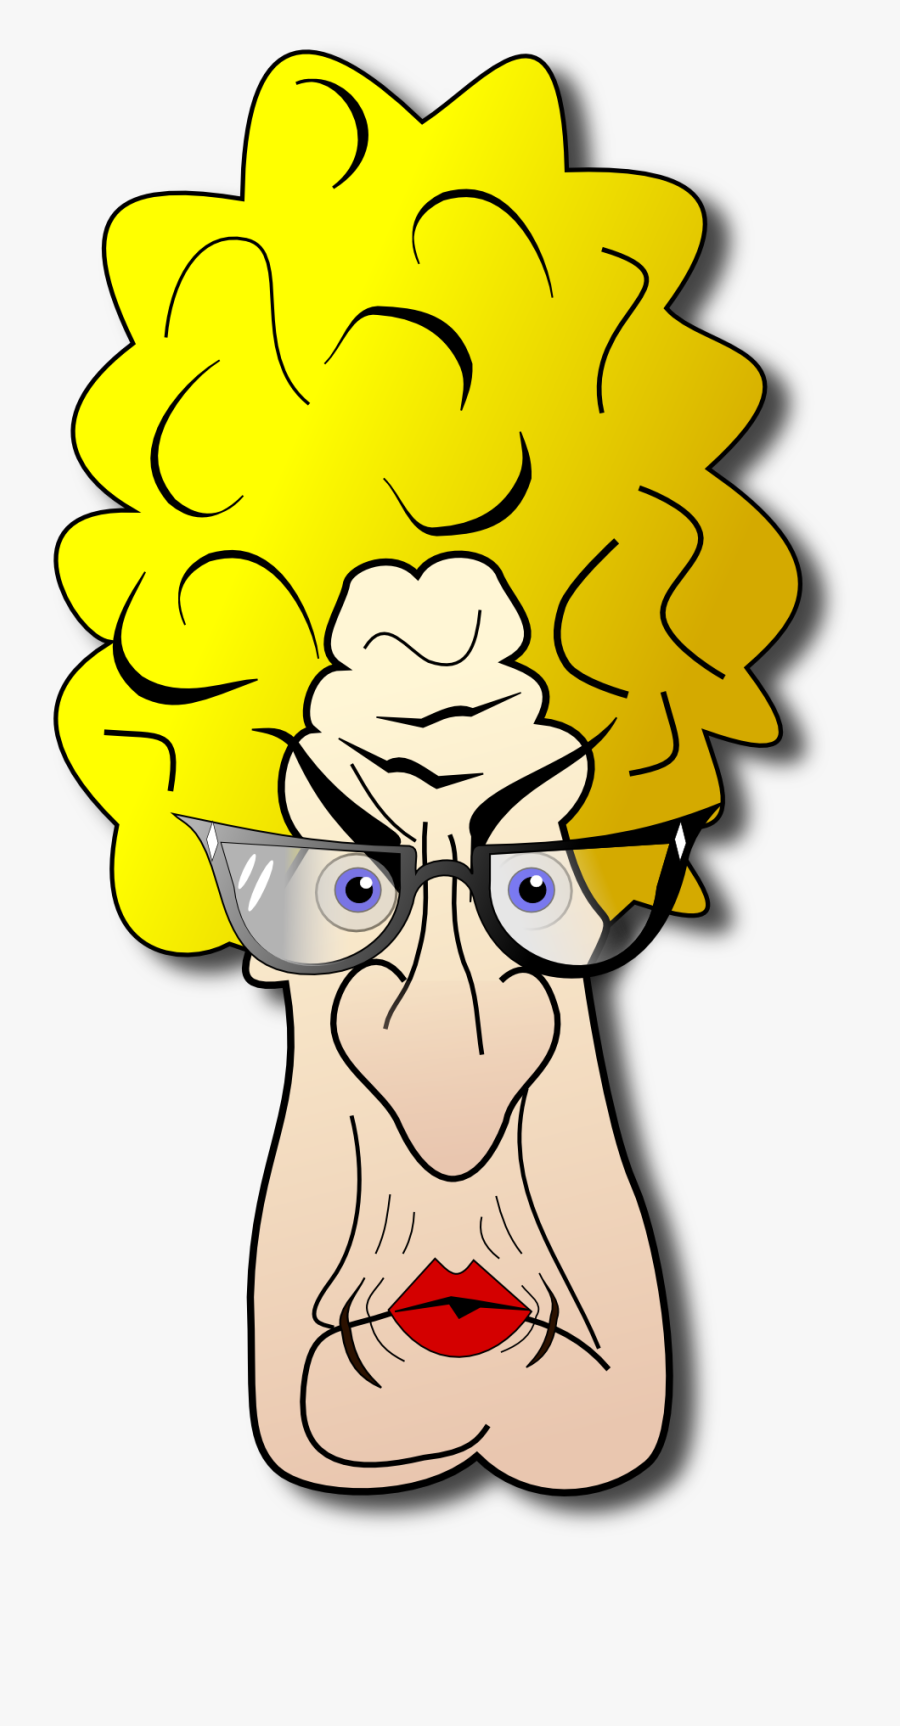 Old Angry Woman - Old Teacher Transparent Background, Transparent Clipart